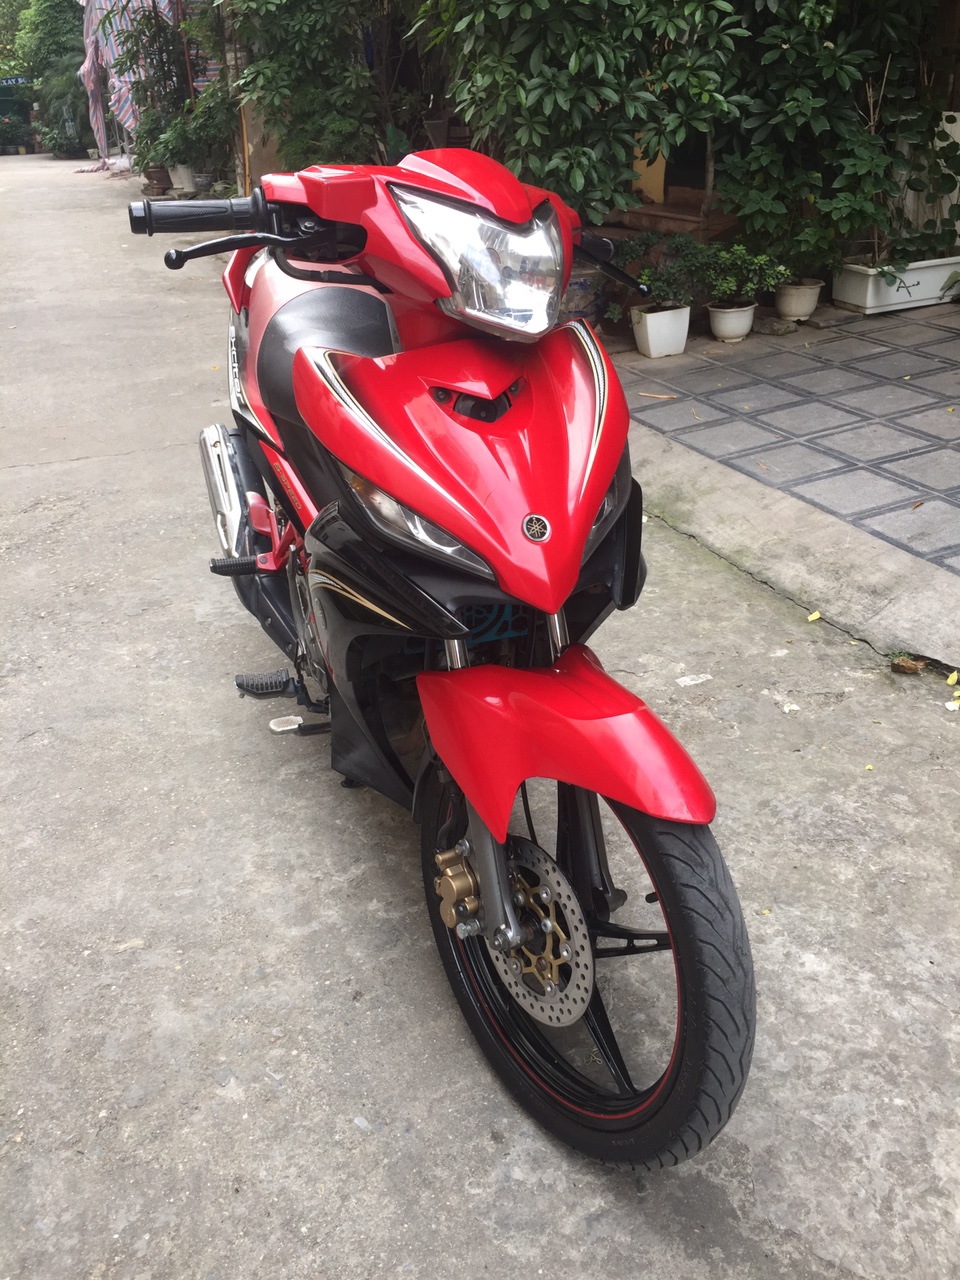 Exciter 135RC con tay 2012 do chinh chu may chat luong 22tr800